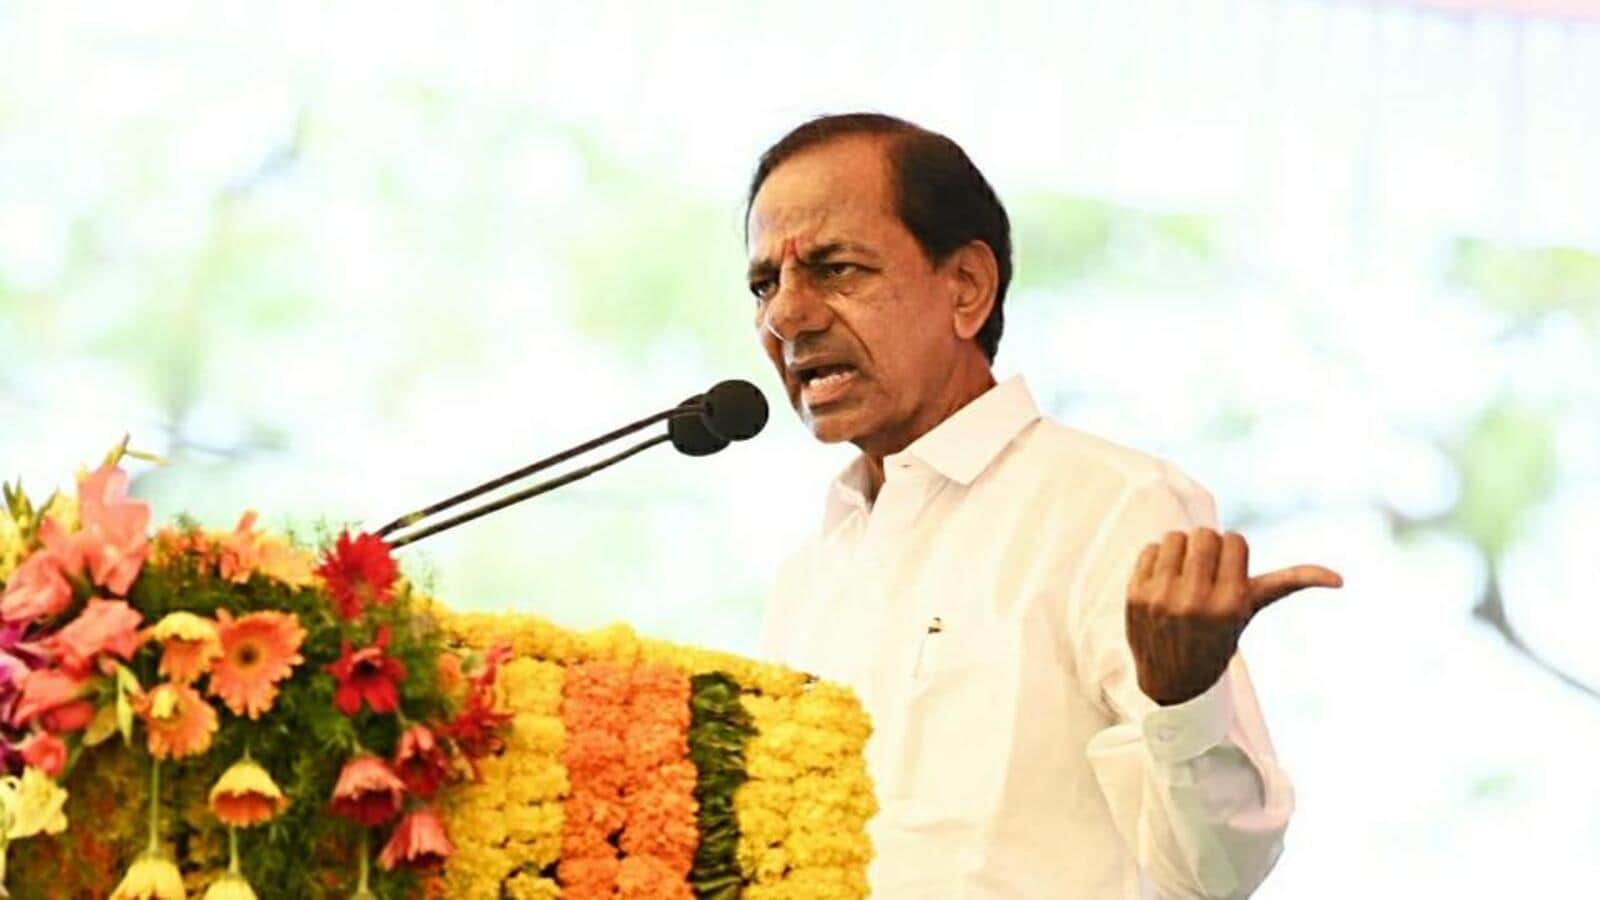 Chief Minister K Chandrashekhar Rao calls for out-of-the-box thinking to make India super power.